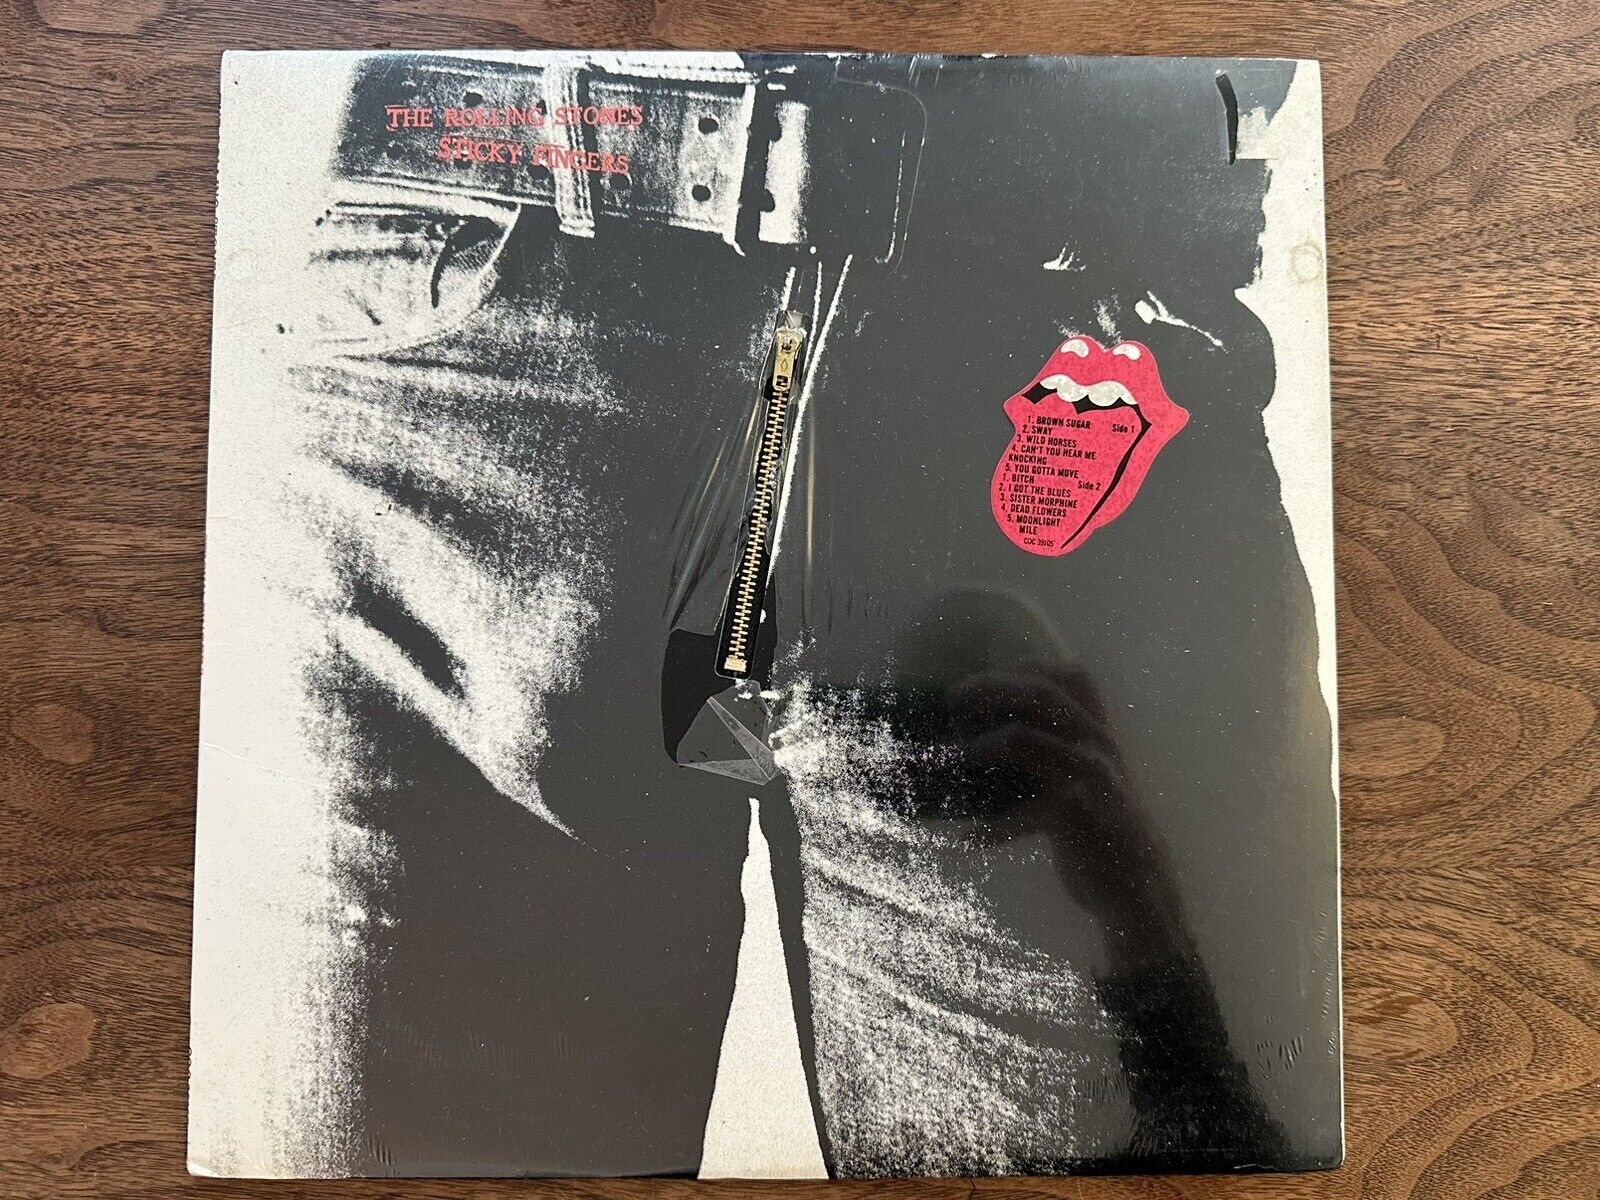 THE ROLLING STONES- STICKY FINGERS- FACTORY SEALED W/rare hype sticker🎸🤘🏼